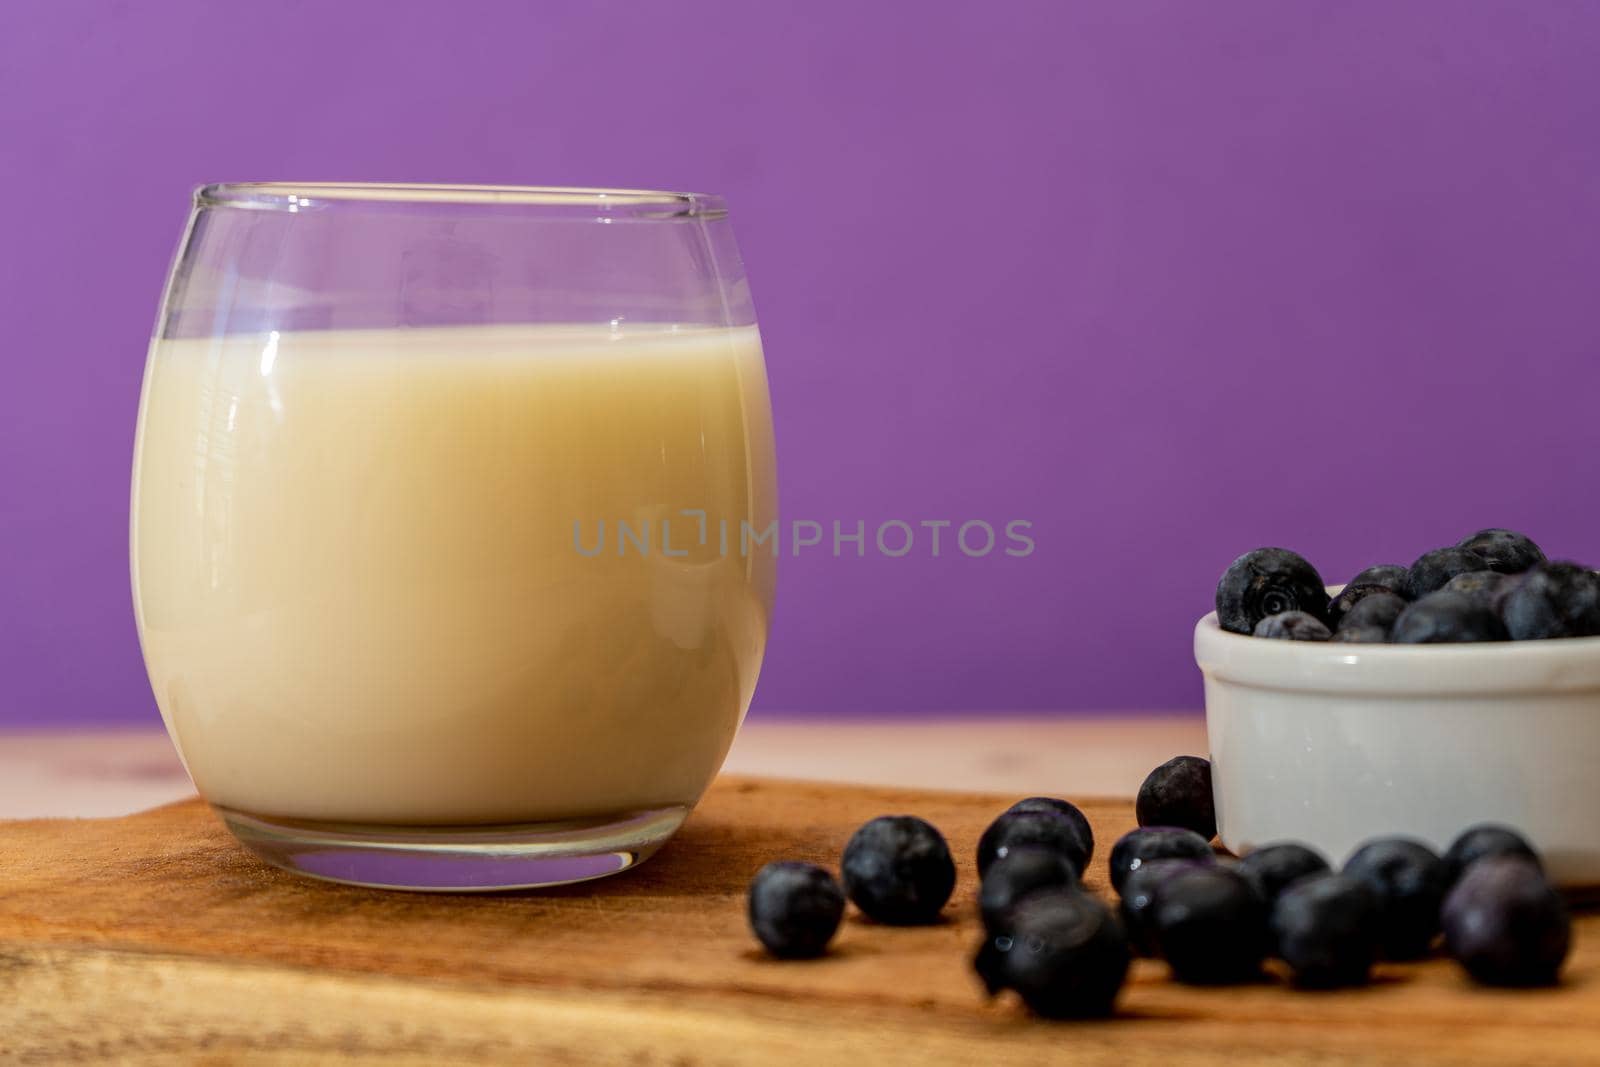 Normal view of a glass of milk next to some blueberries in a modern, stripped-down setting.